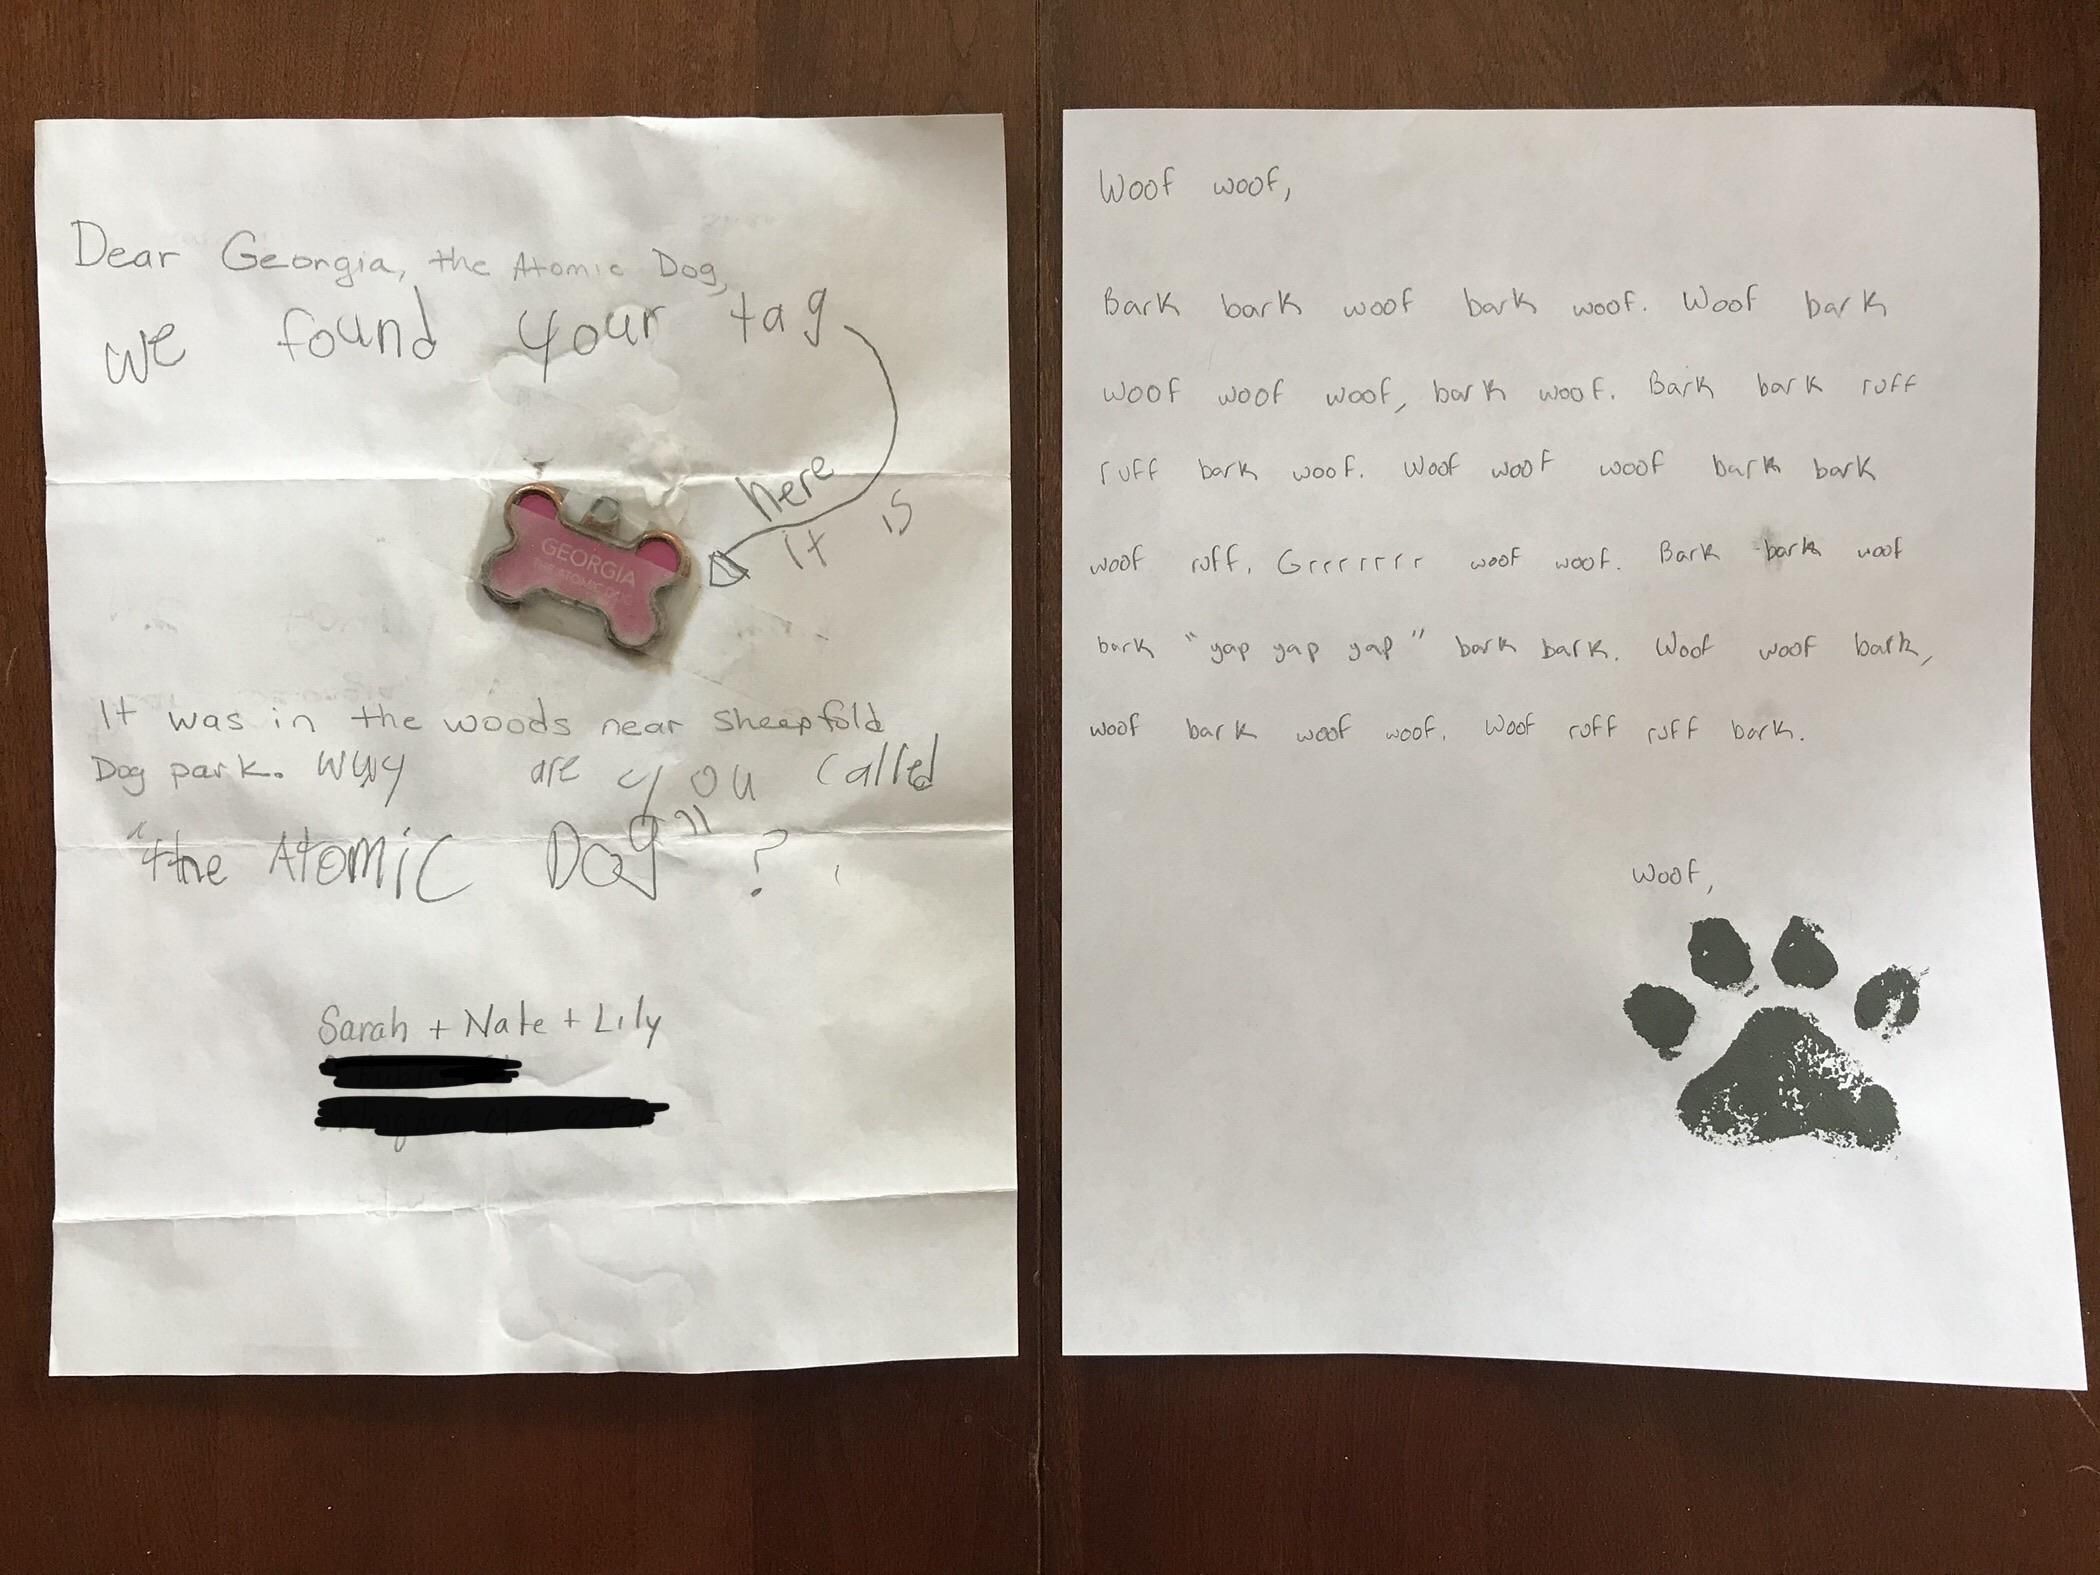 Received an interesting letter in the mail. Georgia must have been a previous tenant’s dog, so I responded in the only way I could...